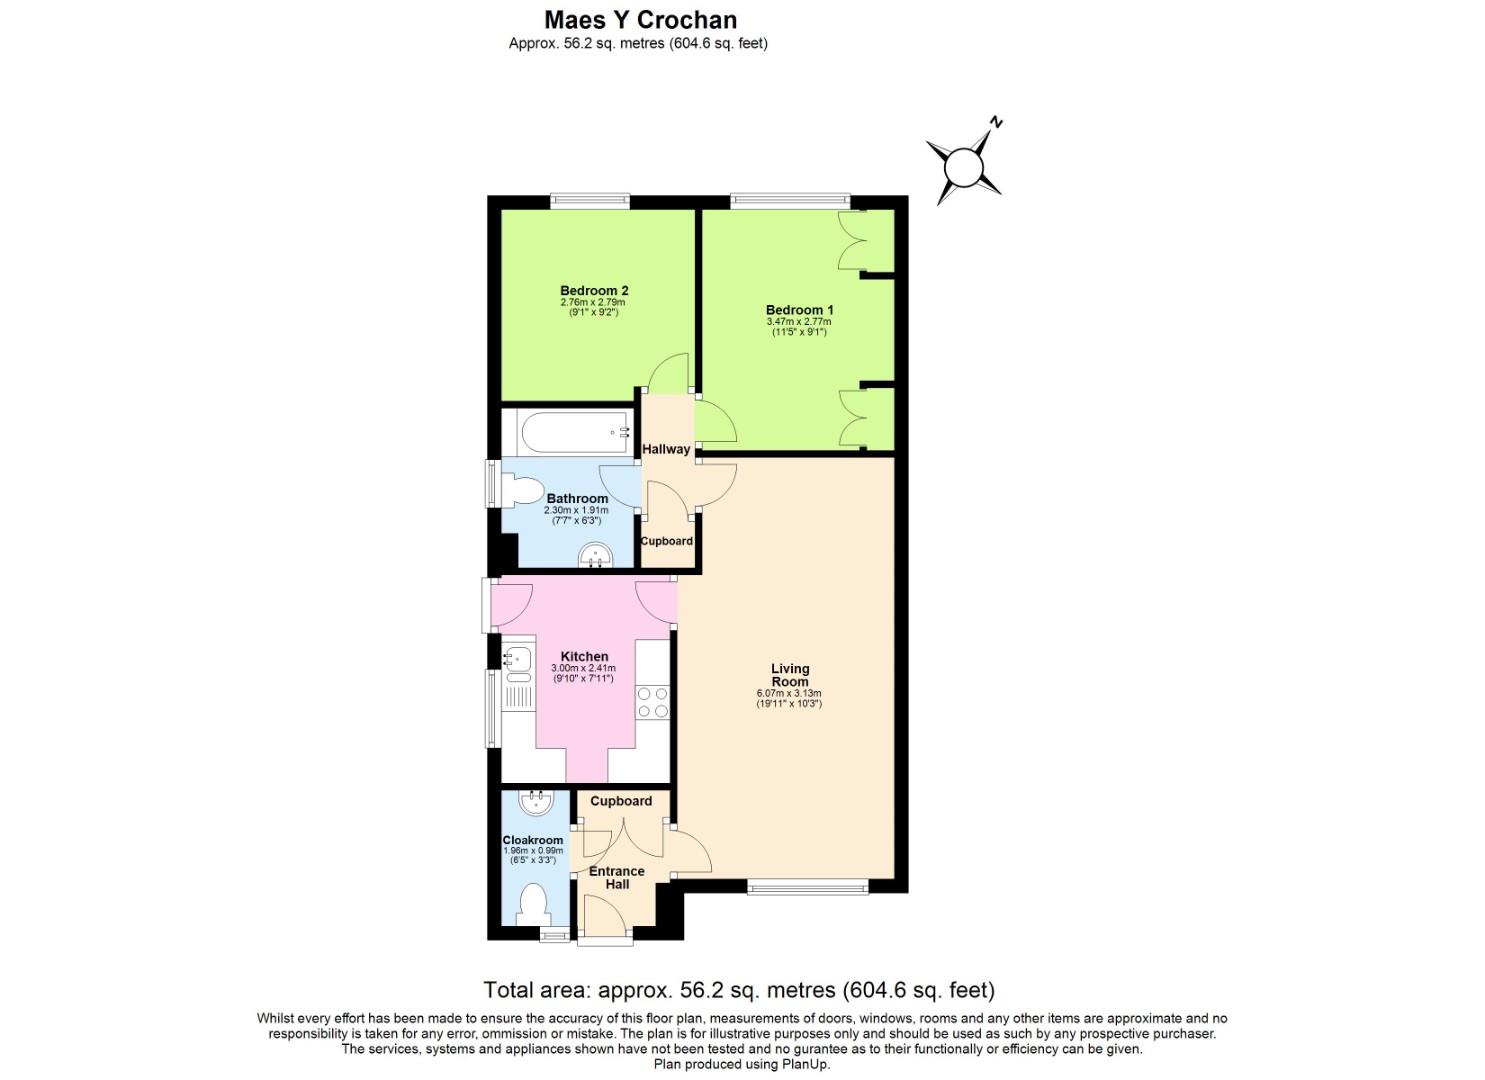 2 bed semi-detached bungalow for sale in Maes-Y-Crochan, Cardiff - Property floorplan